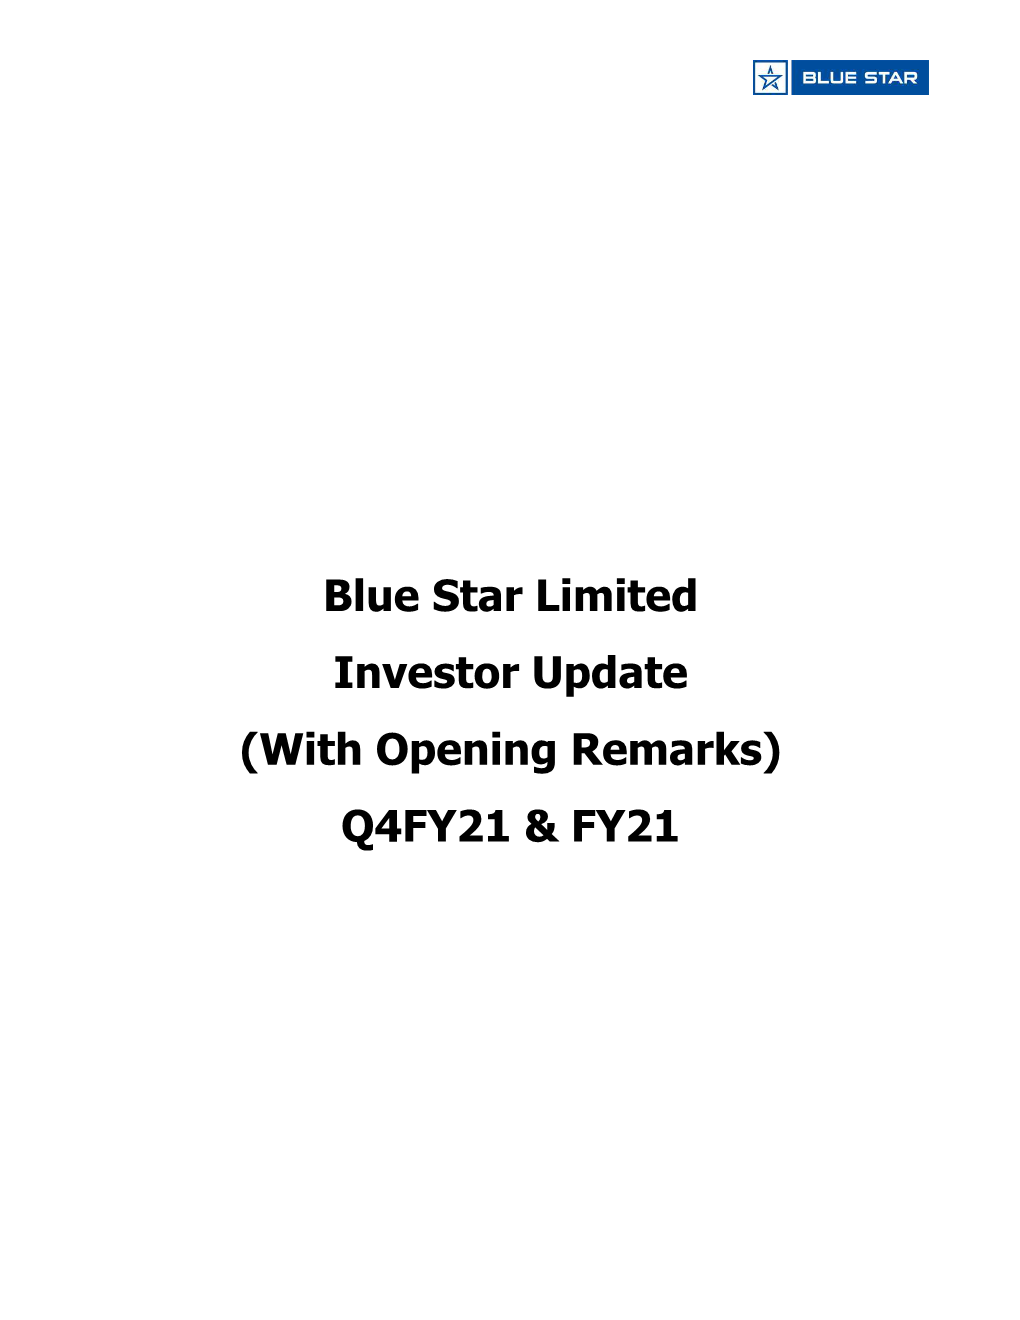 Investor Update (With Opening Remarks) Q4FY21 & FY21